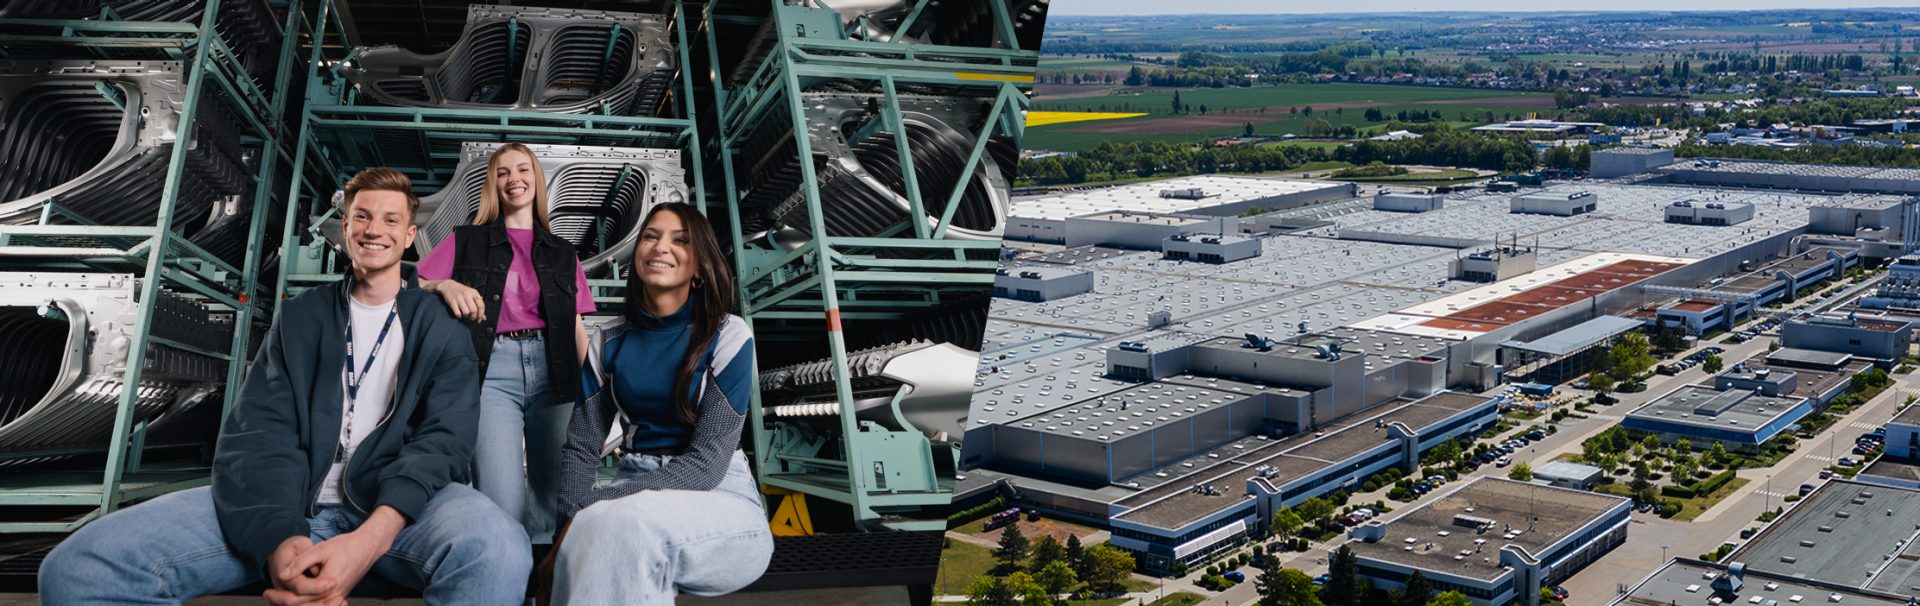 Laughing apprentices in a warehouse and aerial view of the BMW Regensburg plant